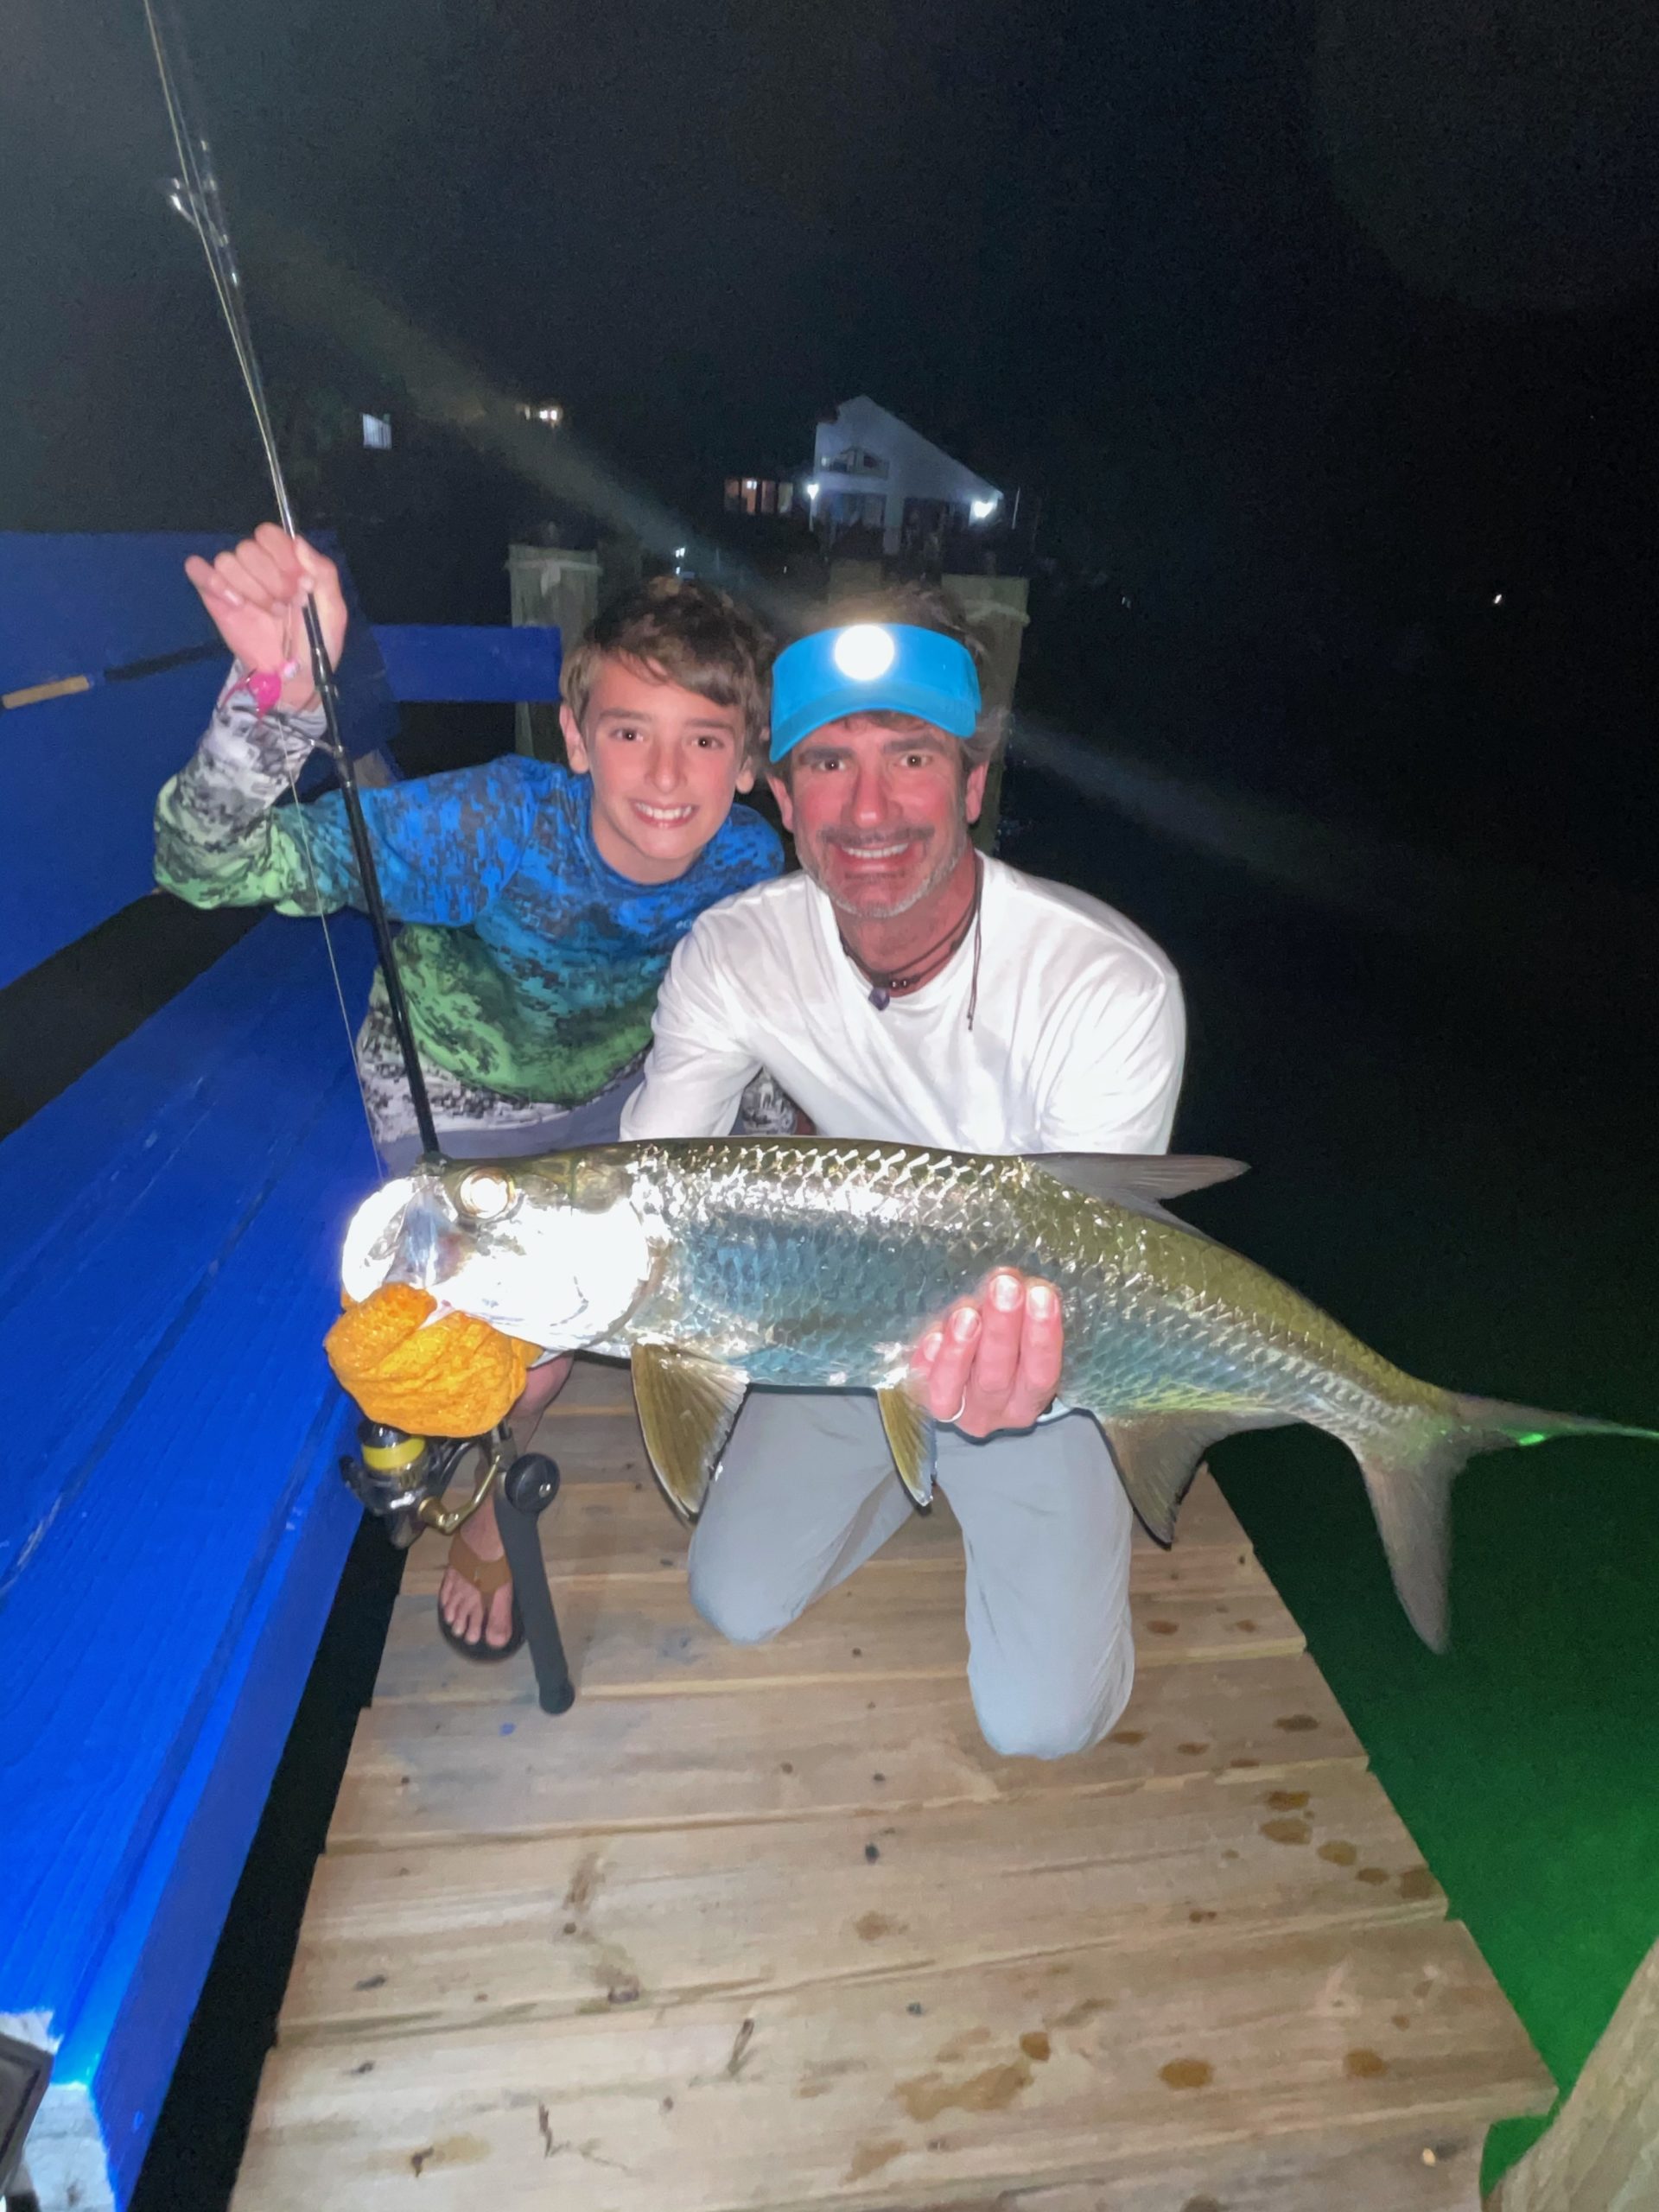 Joe and Taylor Baratta with a Florida Keys tarpon they caught from shore while on vacation last month.